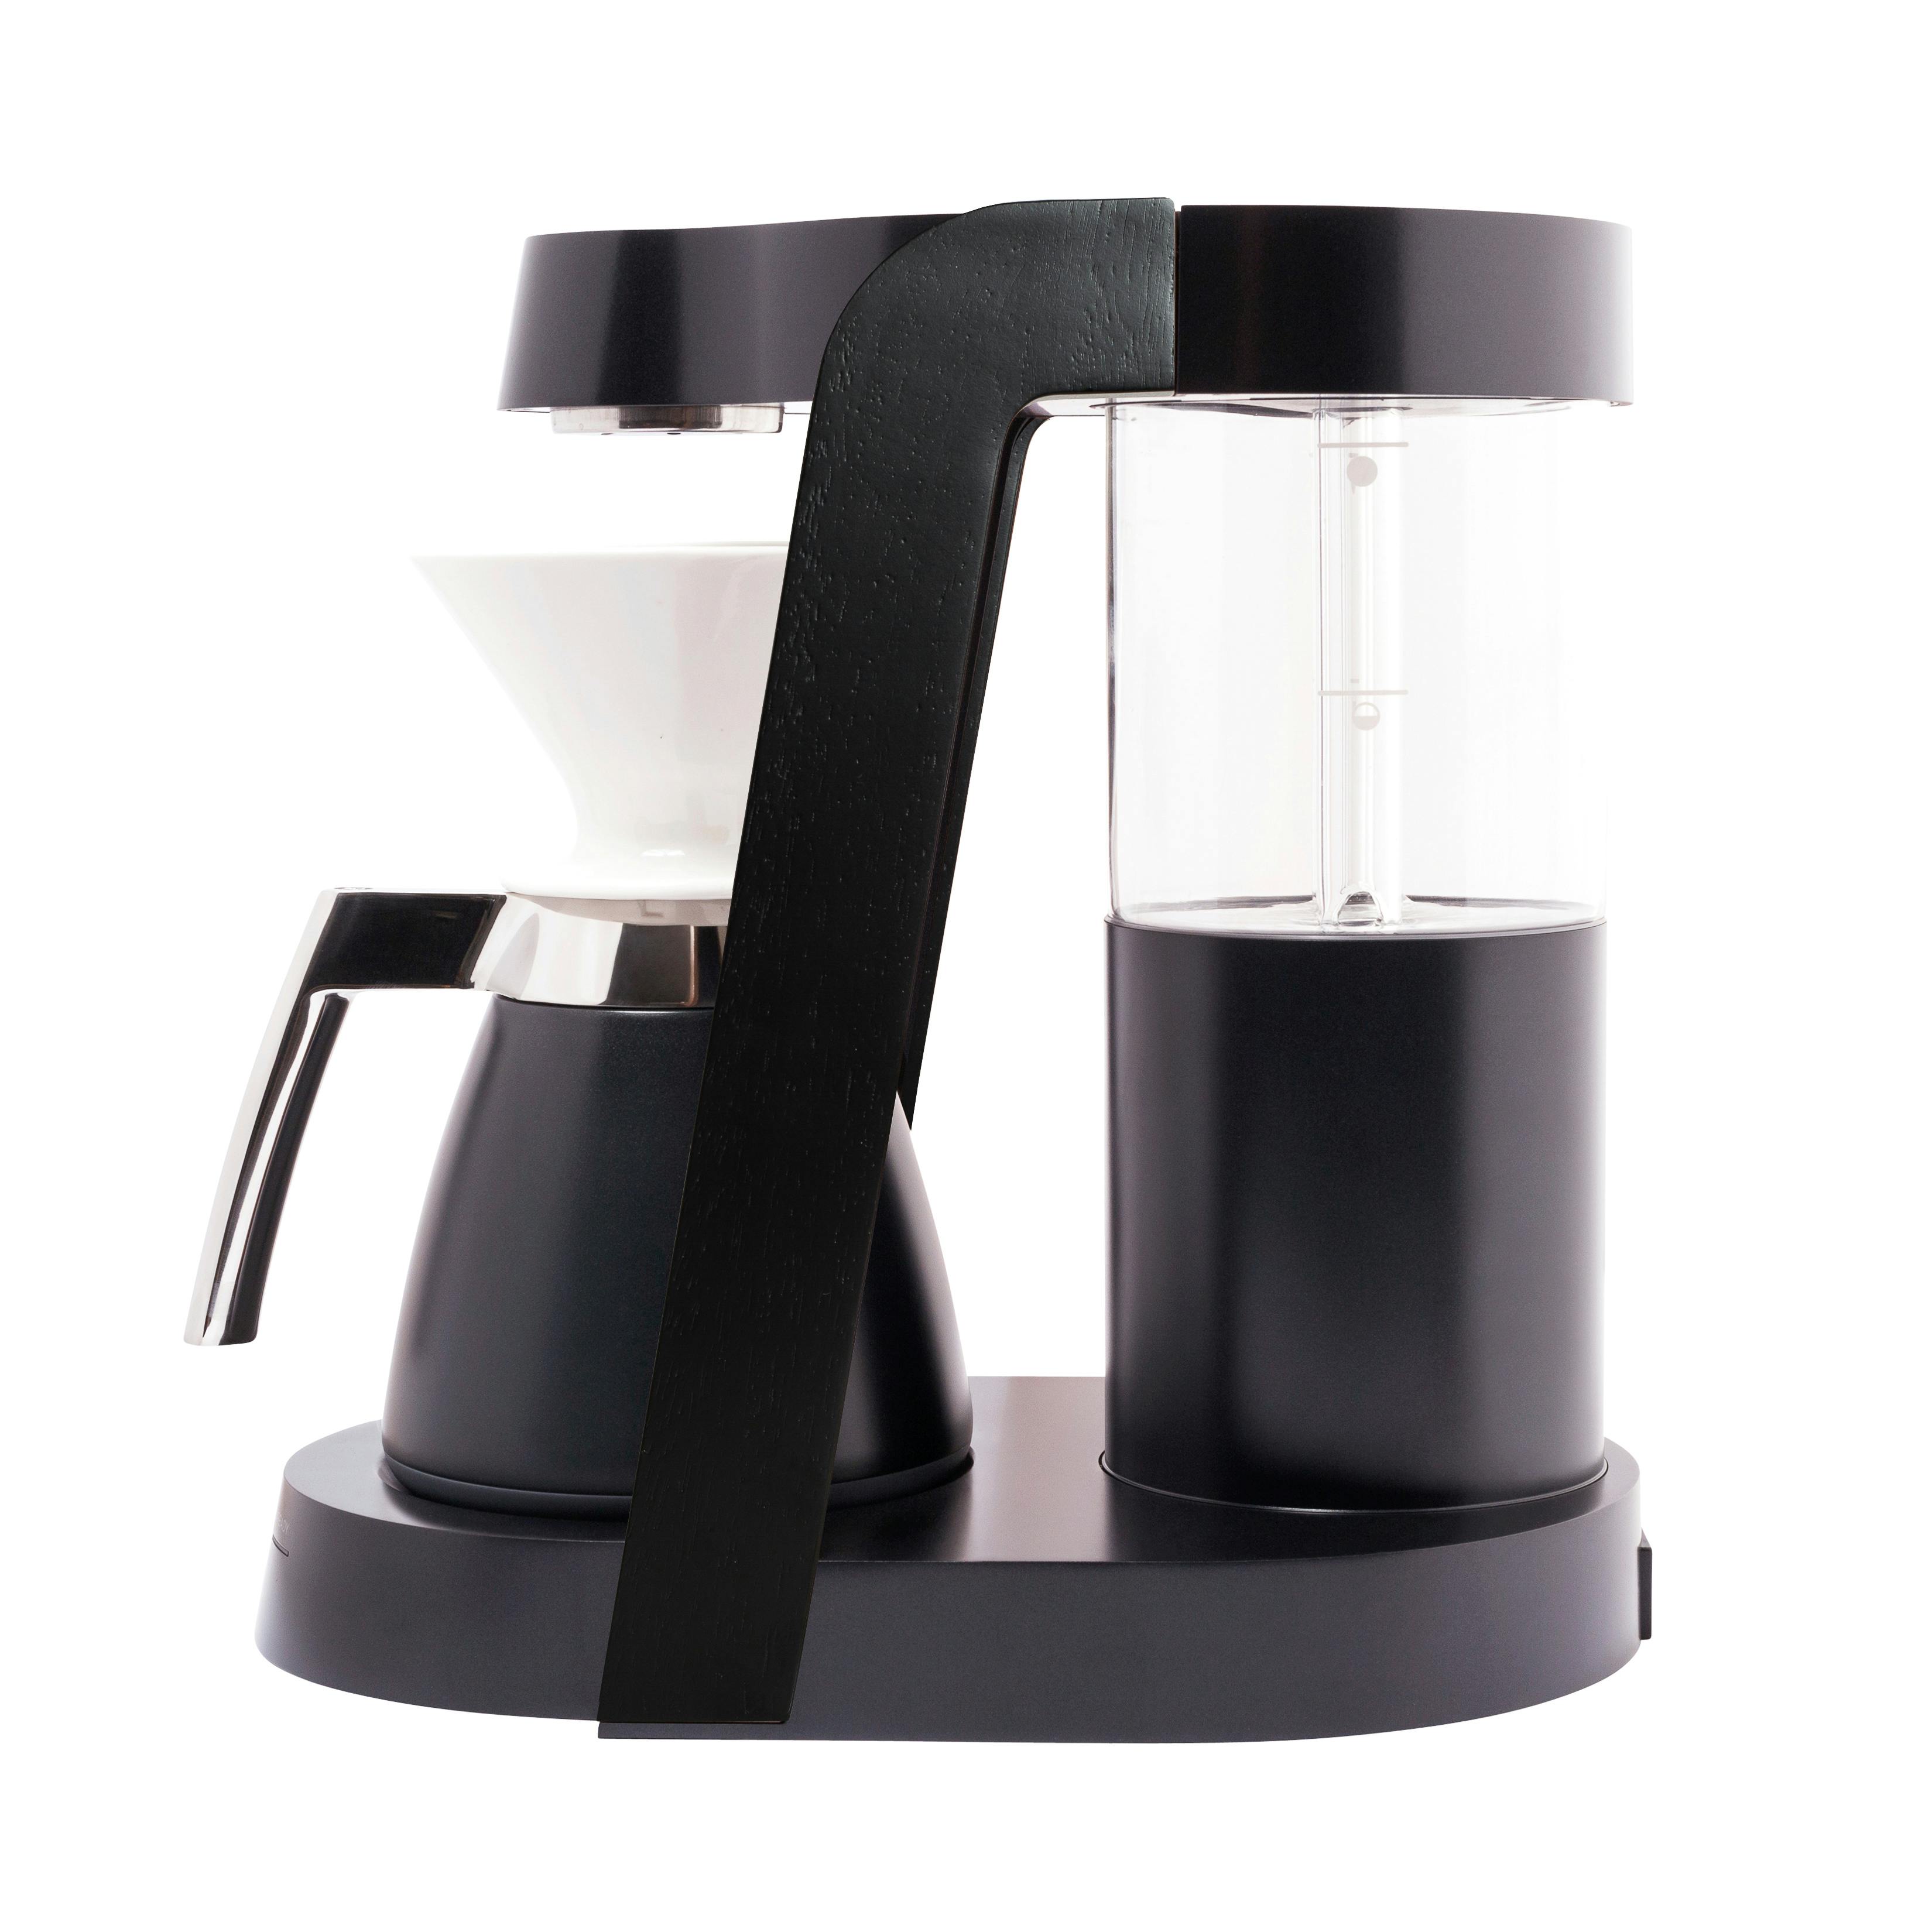 https://huckberry.imgix.net/spree/products/376612/original/9B2WjbiThc_ratio-coffee_ratio_eight_coffee_maker_with_thermal_carafe_and_coffee_cups_3_original.jpg?auto=format%2C%20compress&crop=top&fit=clip&cs=tinysrgb&ixlib=react-9.5.2